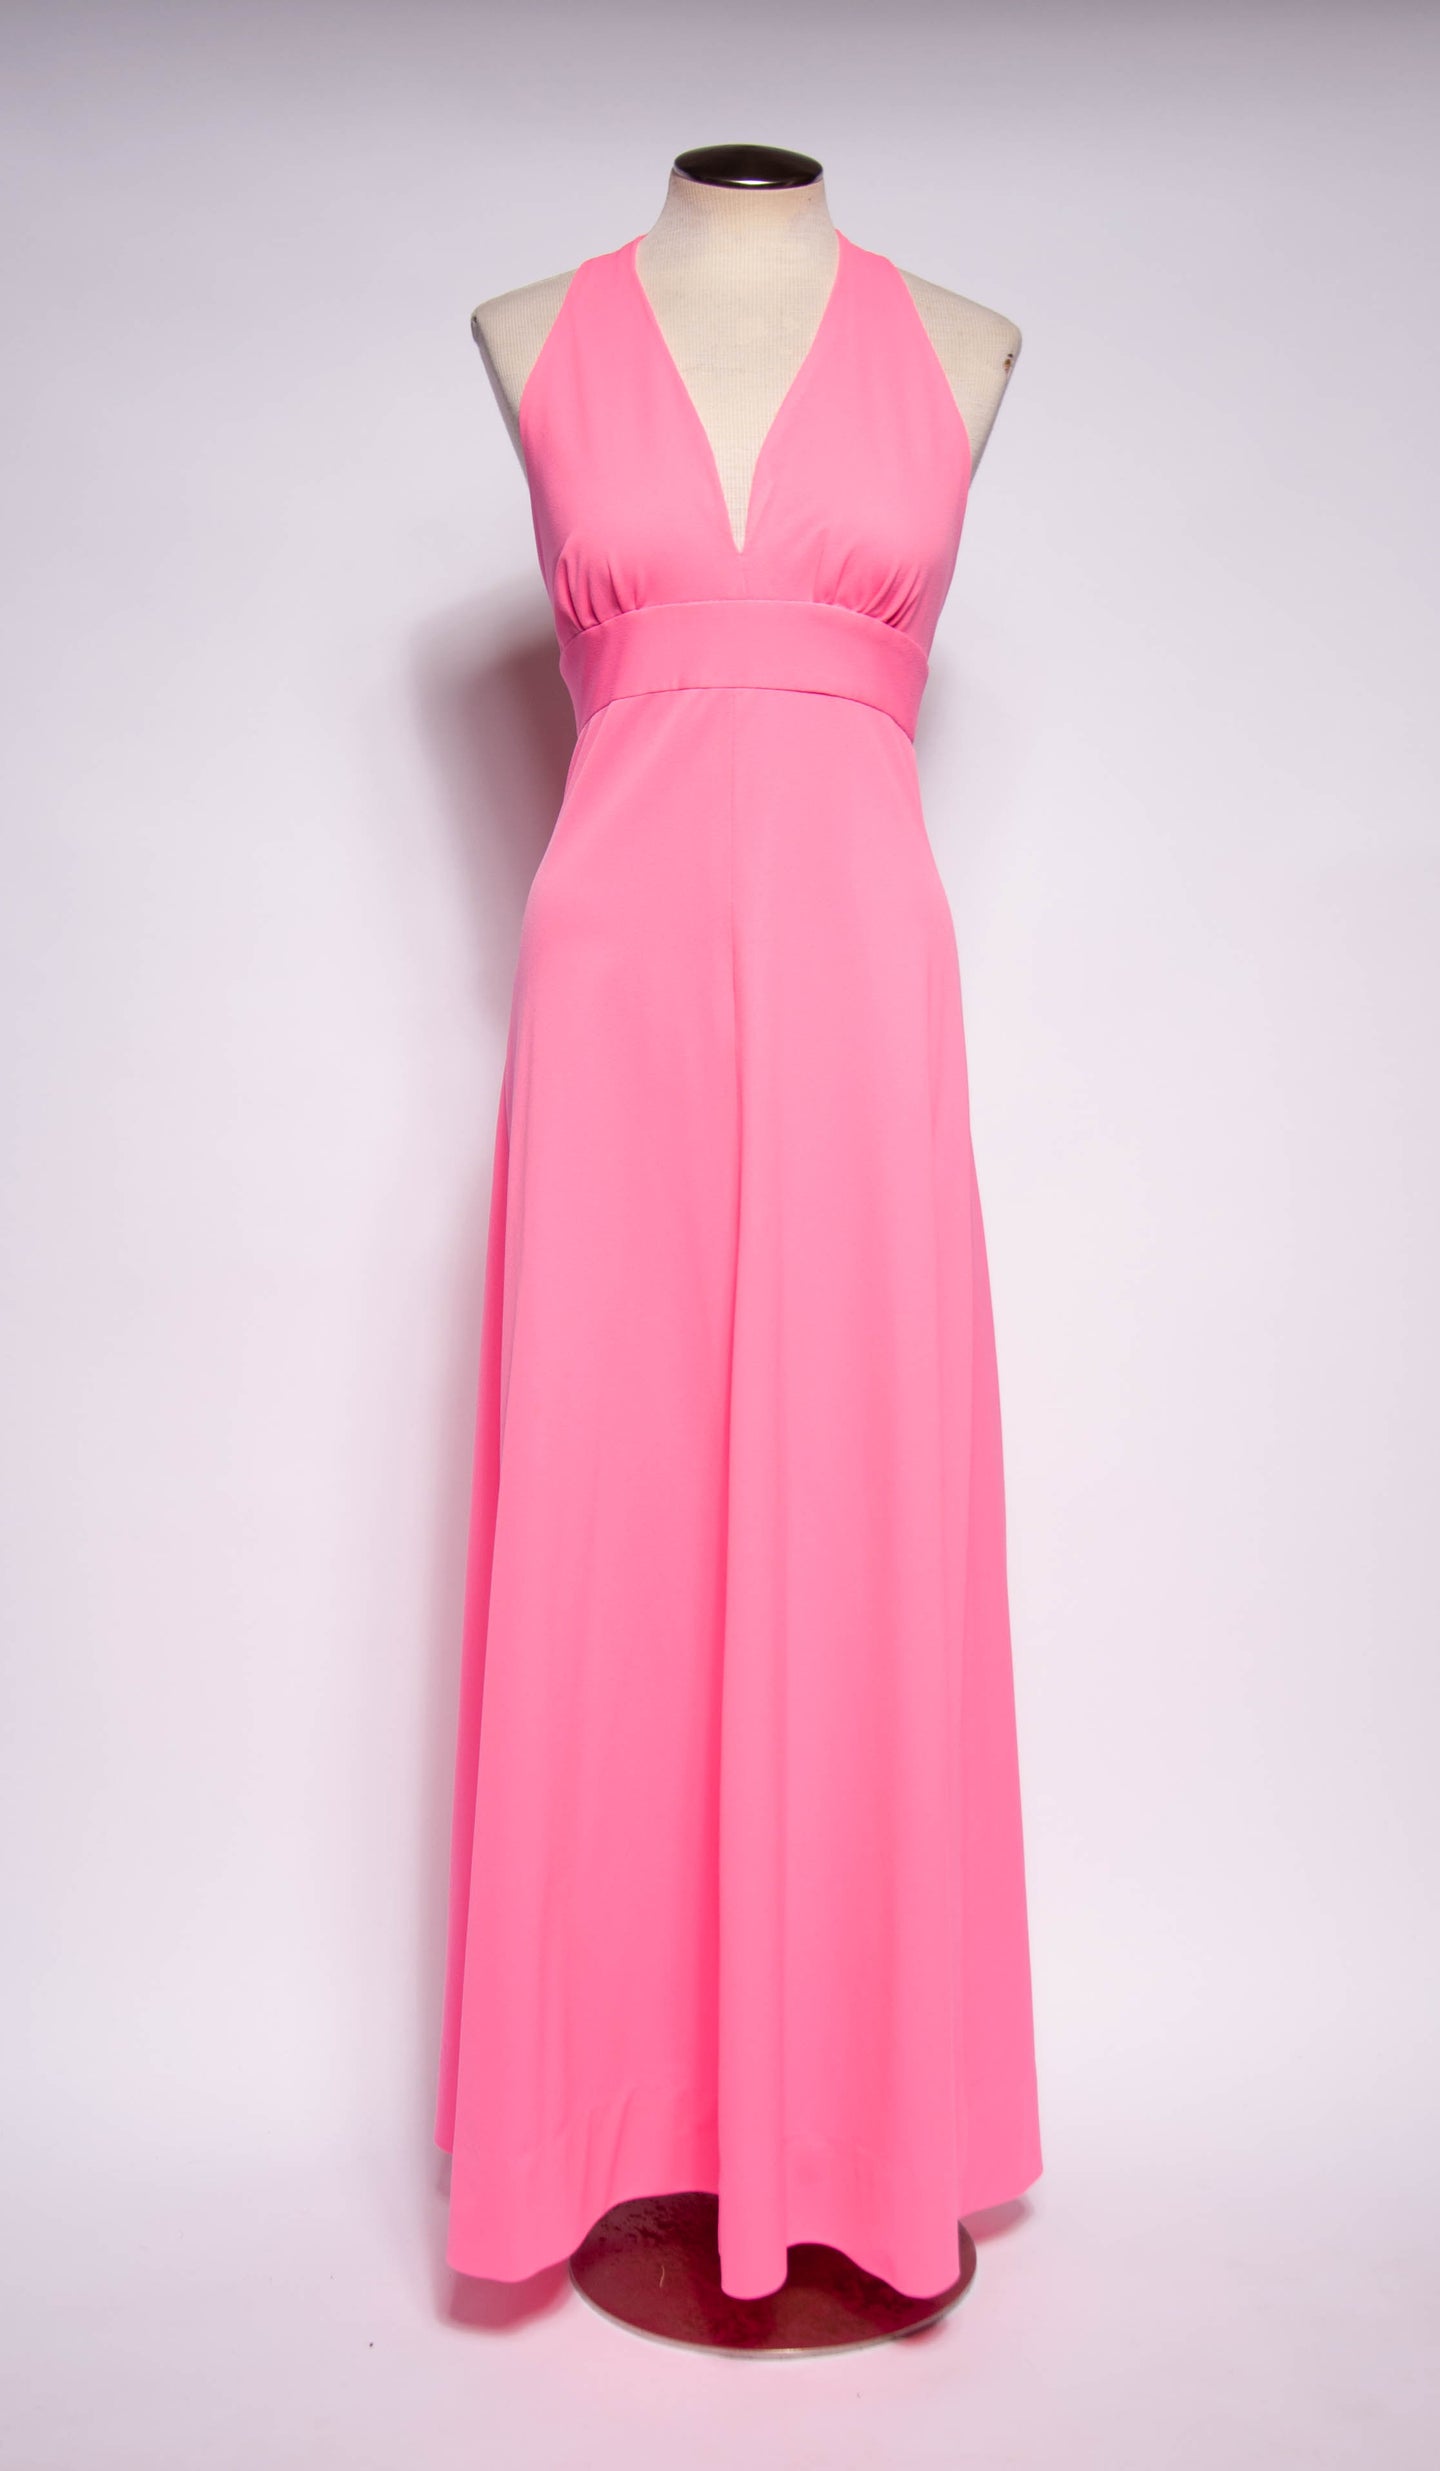 VINTAGE 1970S HIGHLIGHT PINK DISCO BARBIE GOWN